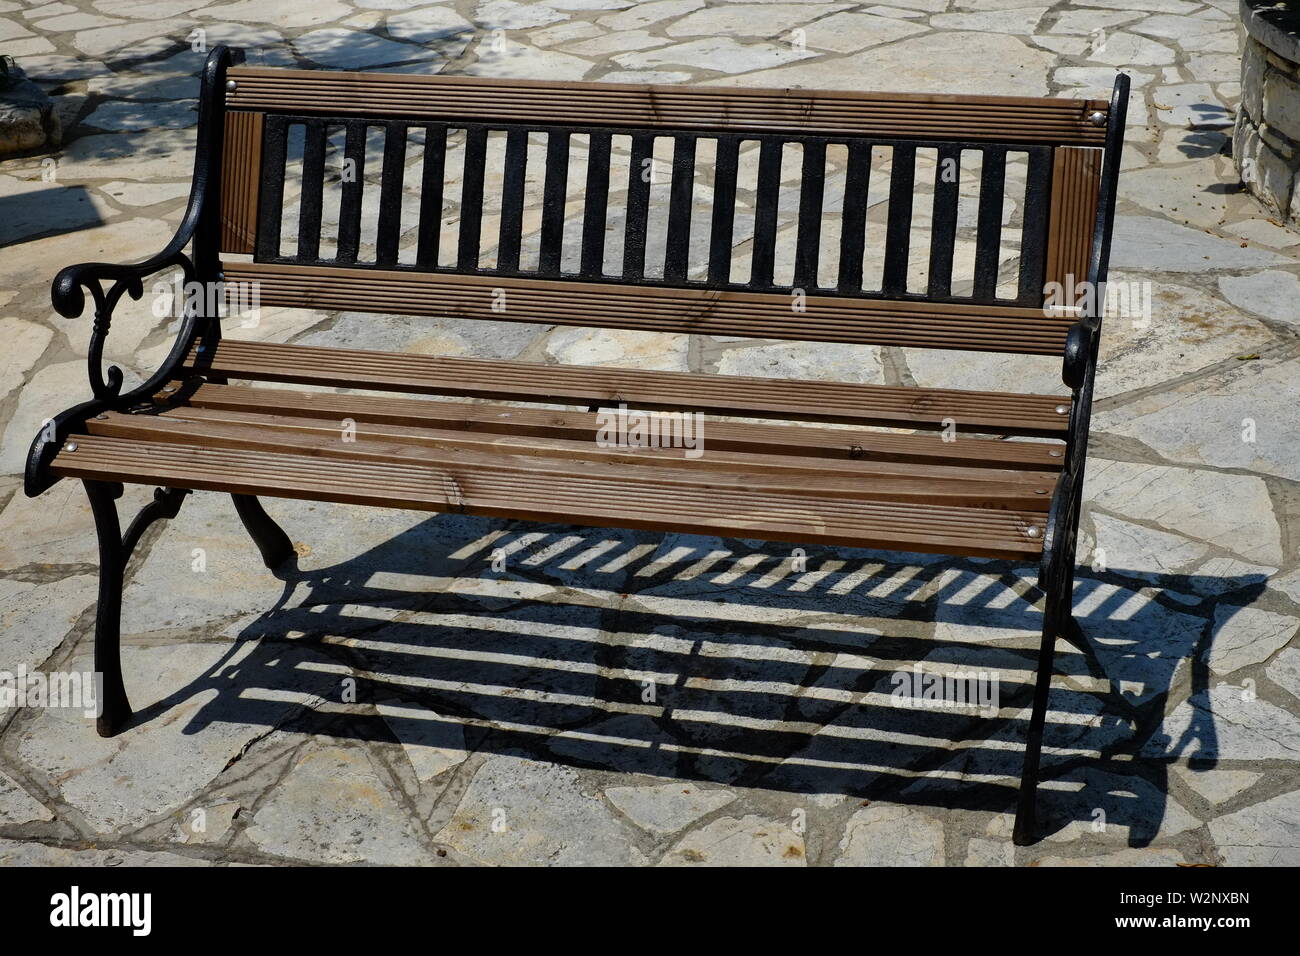 Corfu A beautiful two seated bench clean and freshly painted.A scene which all of us will have different memories some good and some not so good. Stock Photo